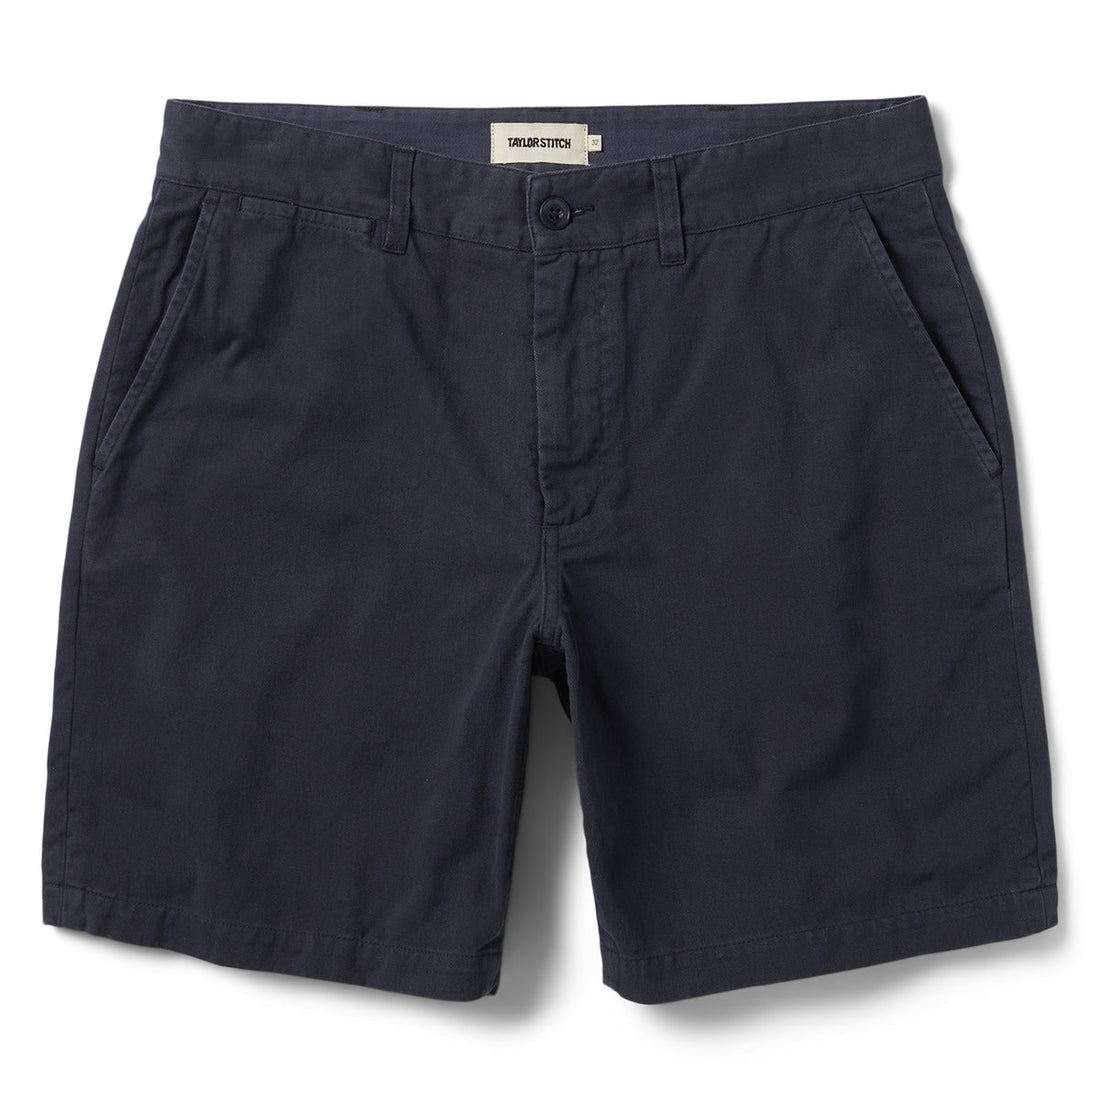 Taylor Stitch - The Foundation Short in Navy Twill